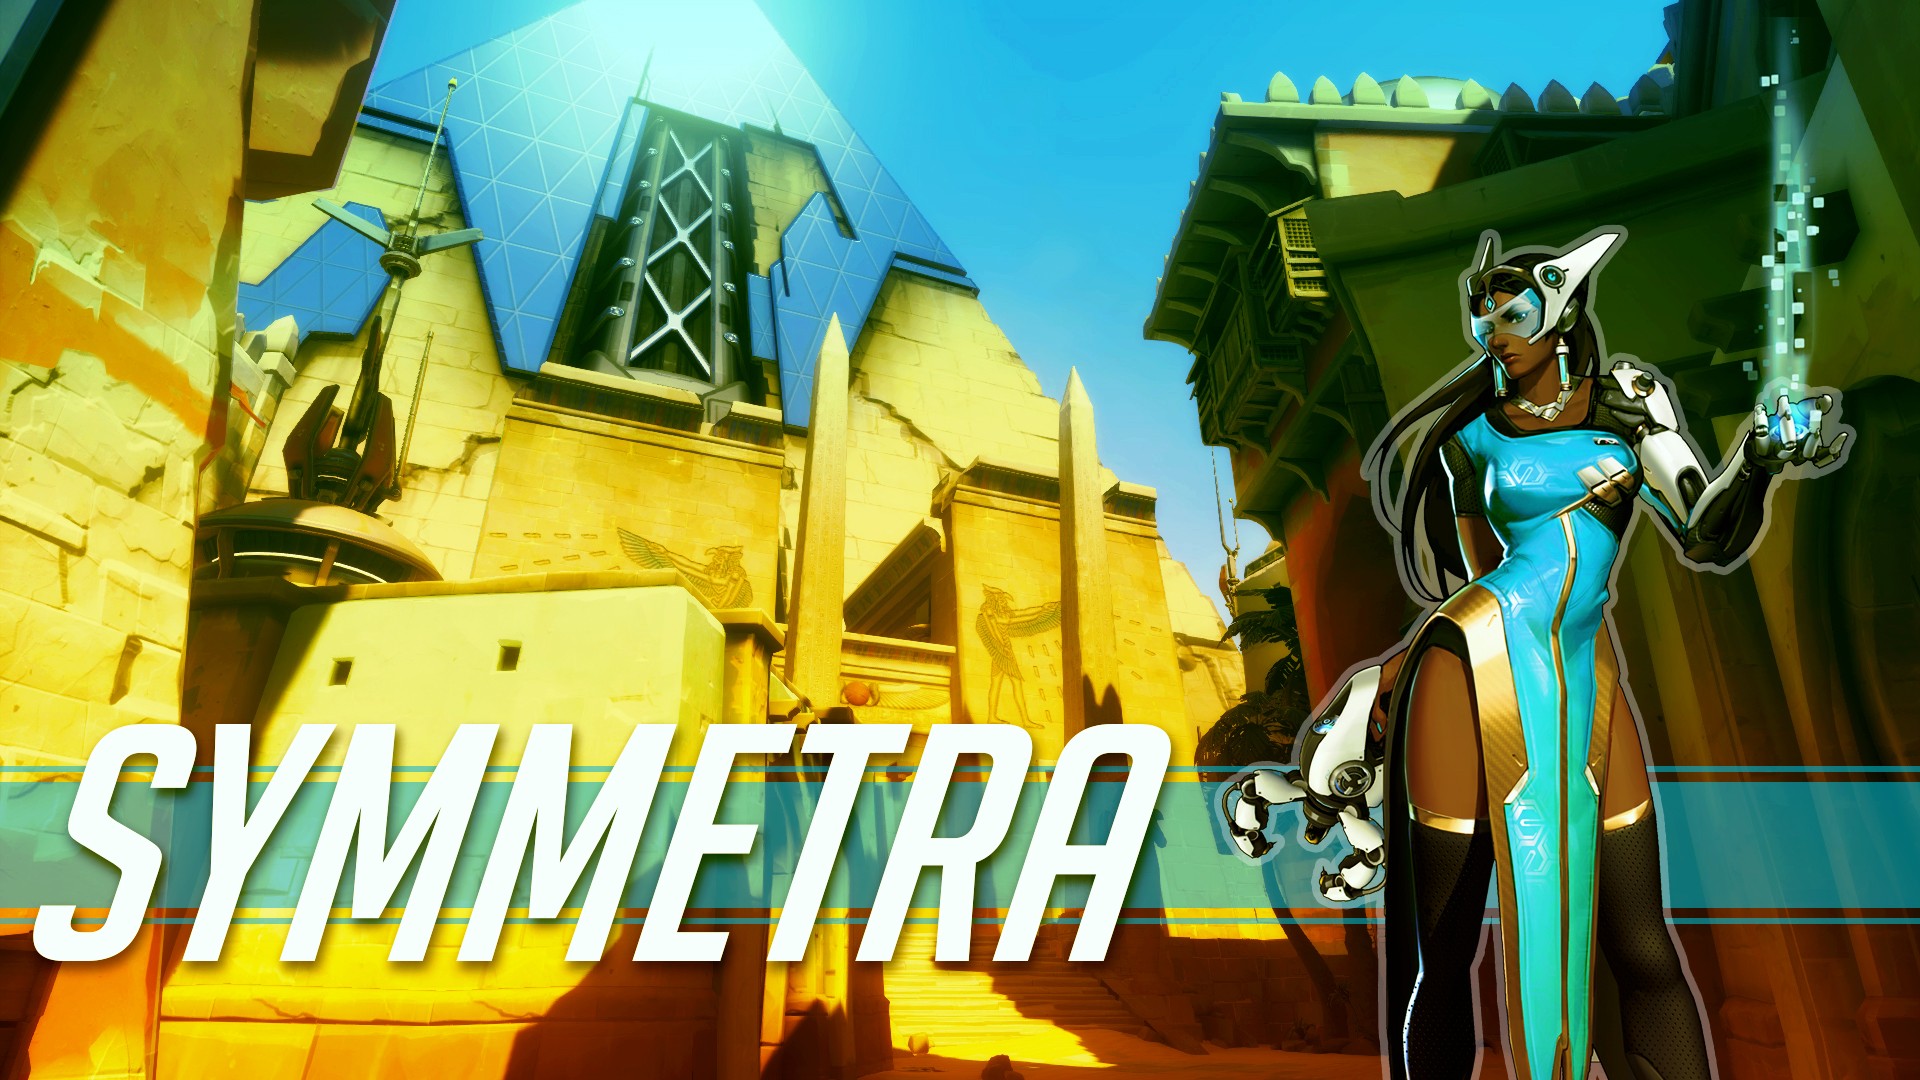 General 1920x1080 Overwatch Blizzard Entertainment video games livewirehd (Author) Symmetra (Overwatch) PC gaming video game girls